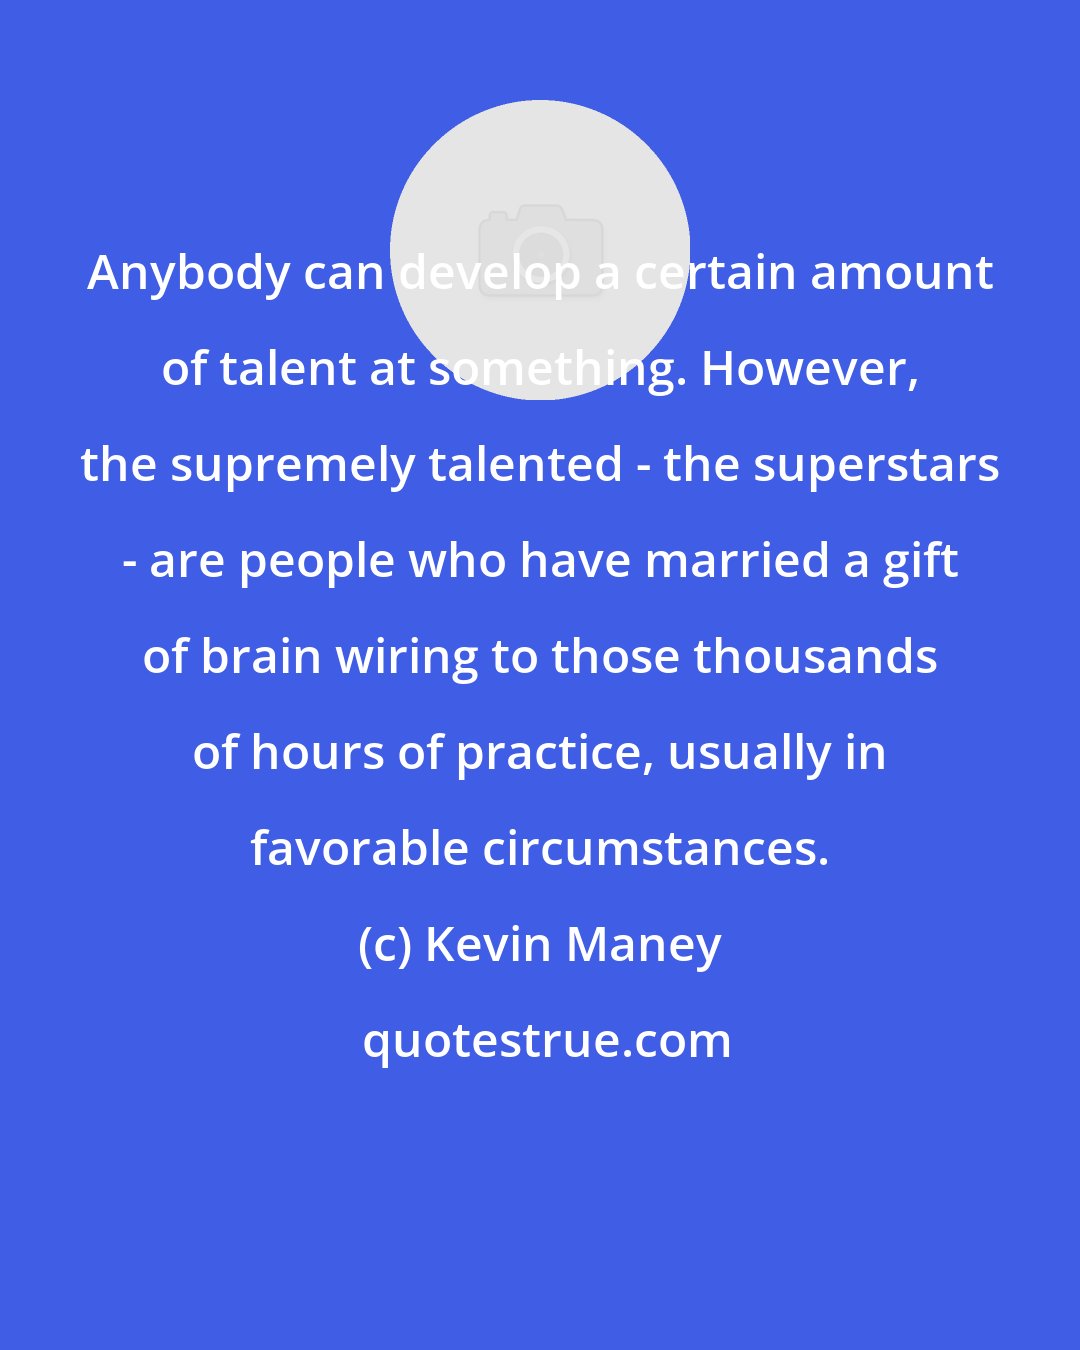 Kevin Maney: Anybody can develop a certain amount of talent at something. However, the supremely talented - the superstars - are people who have married a gift of brain wiring to those thousands of hours of practice, usually in favorable circumstances.